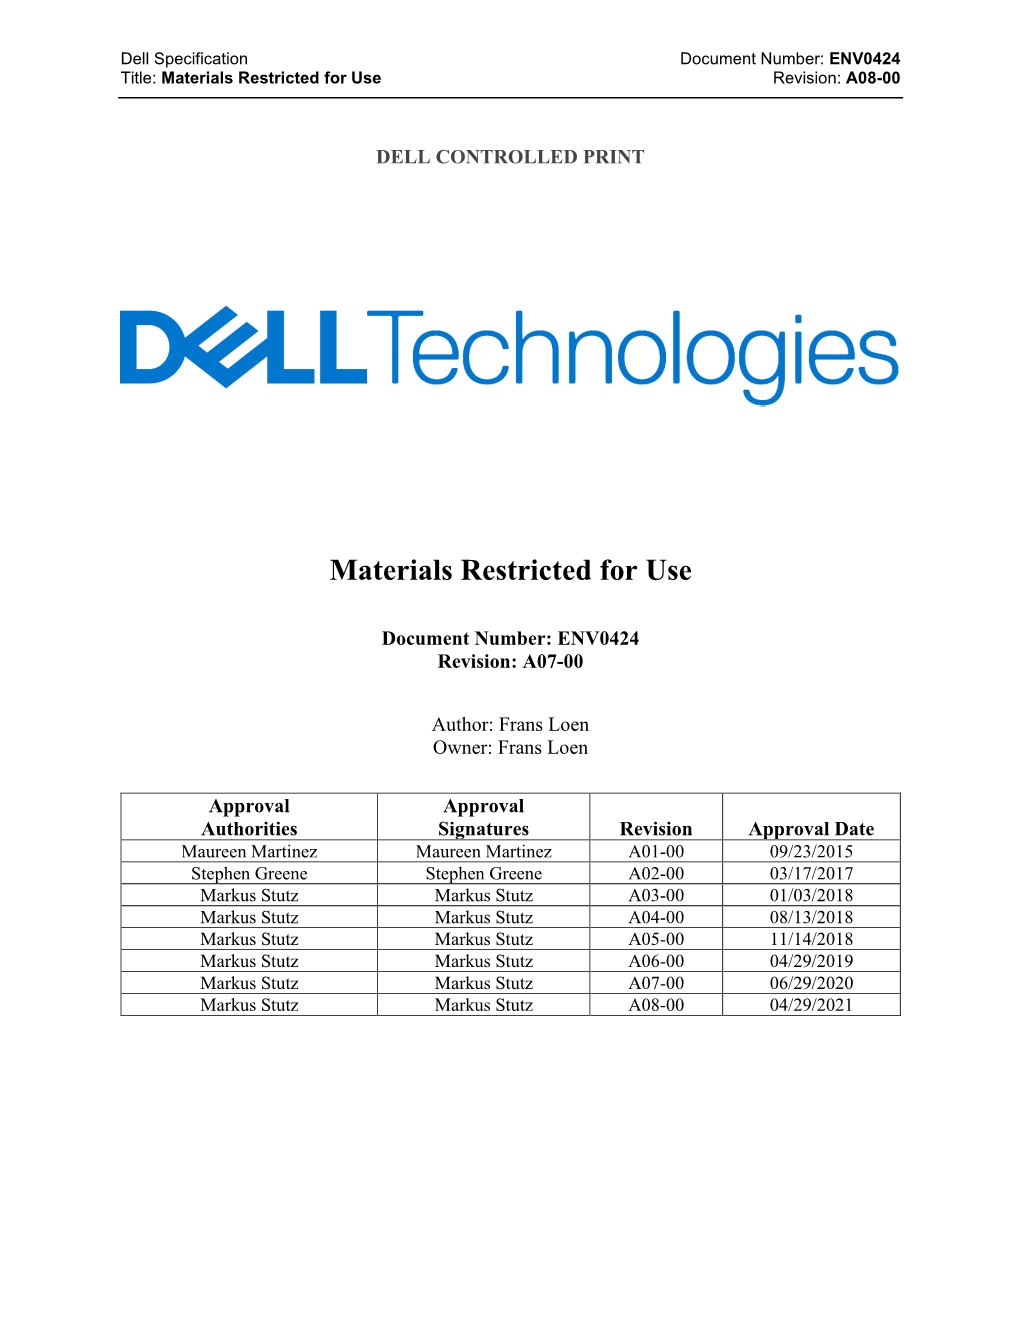 Dell Materials Restricted for Use Specification